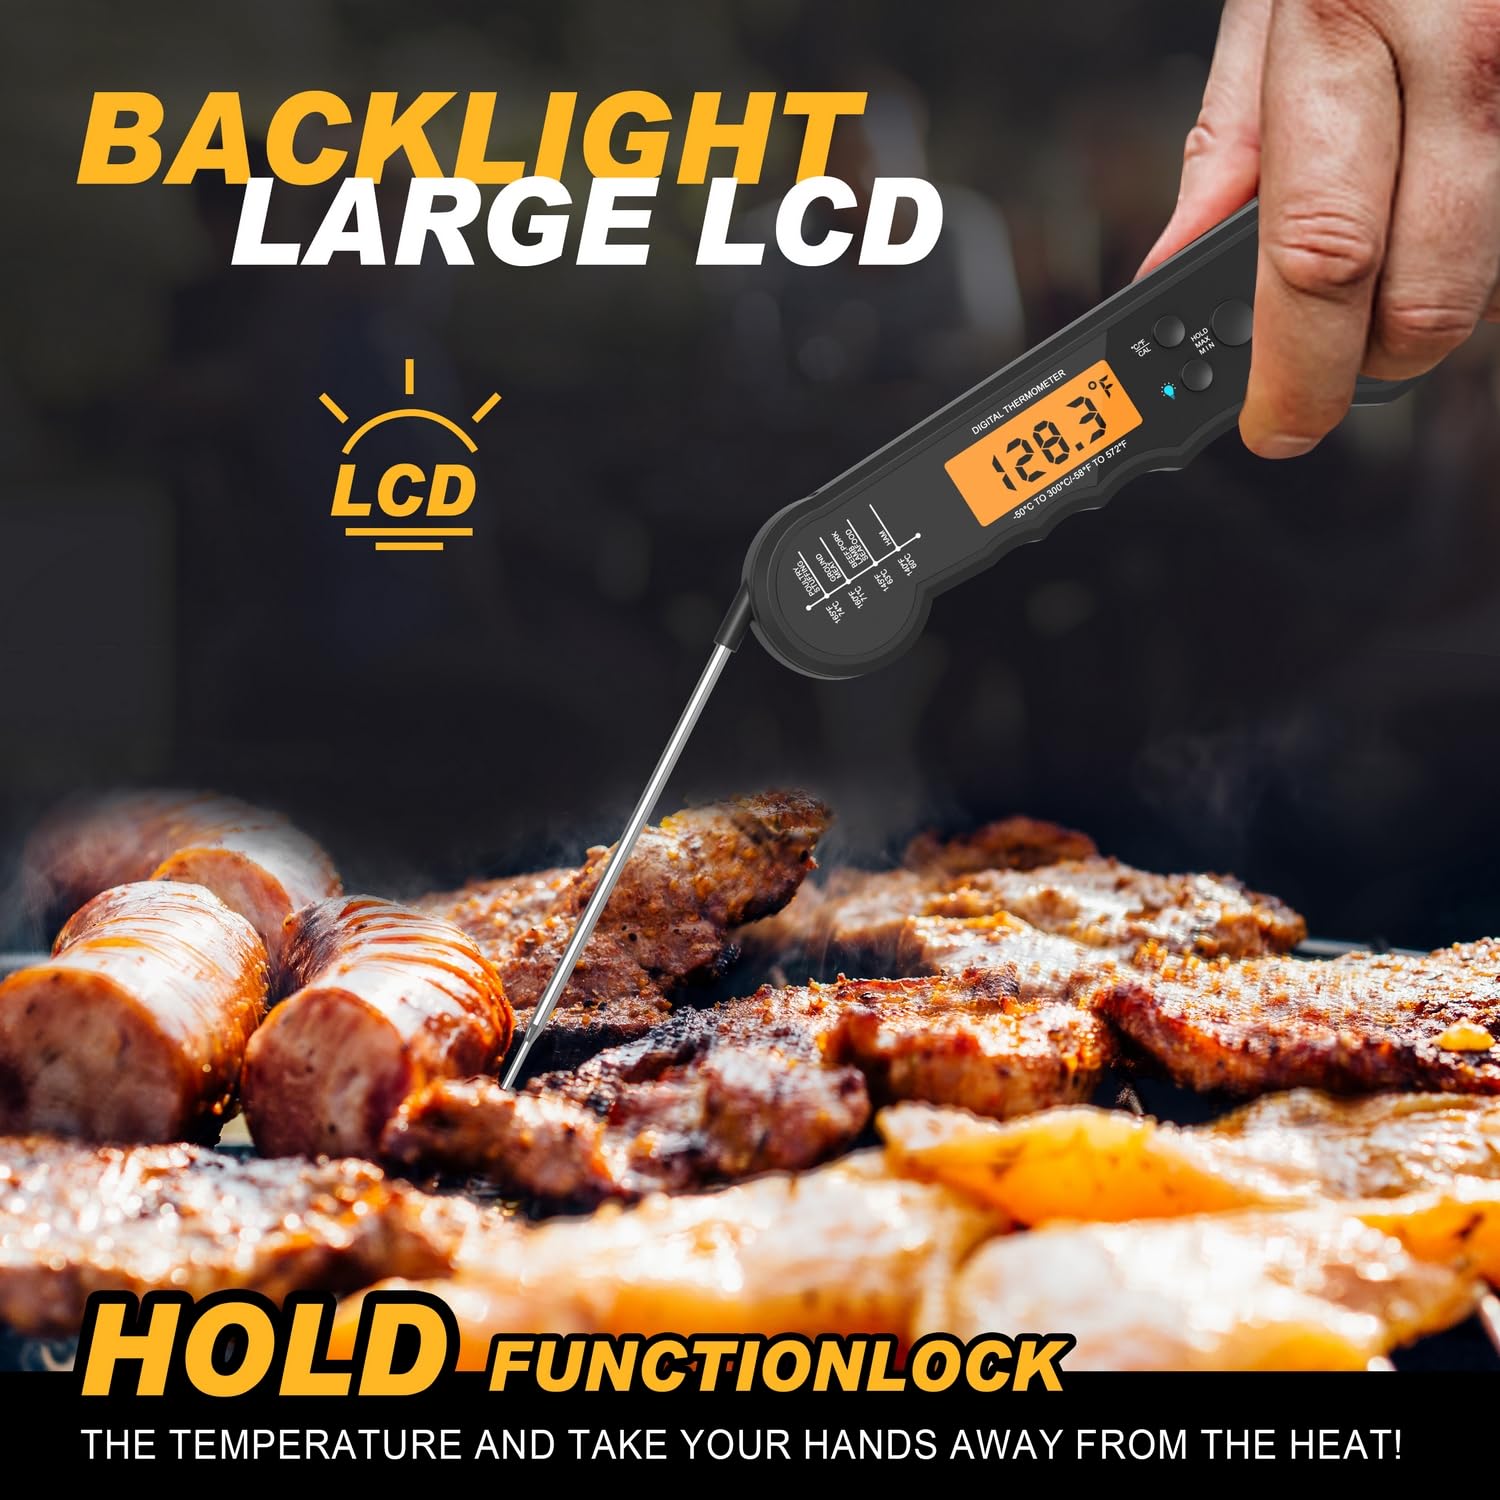 Waterproof Instant Read Digital Meat Thermometer for Cooking and Grilling, Food Thermometer with Backlight, Magnet, Calibration, and Foldable Probe, Bottle Cap Opener for Kitchen Gadgets, BBQ, Grill